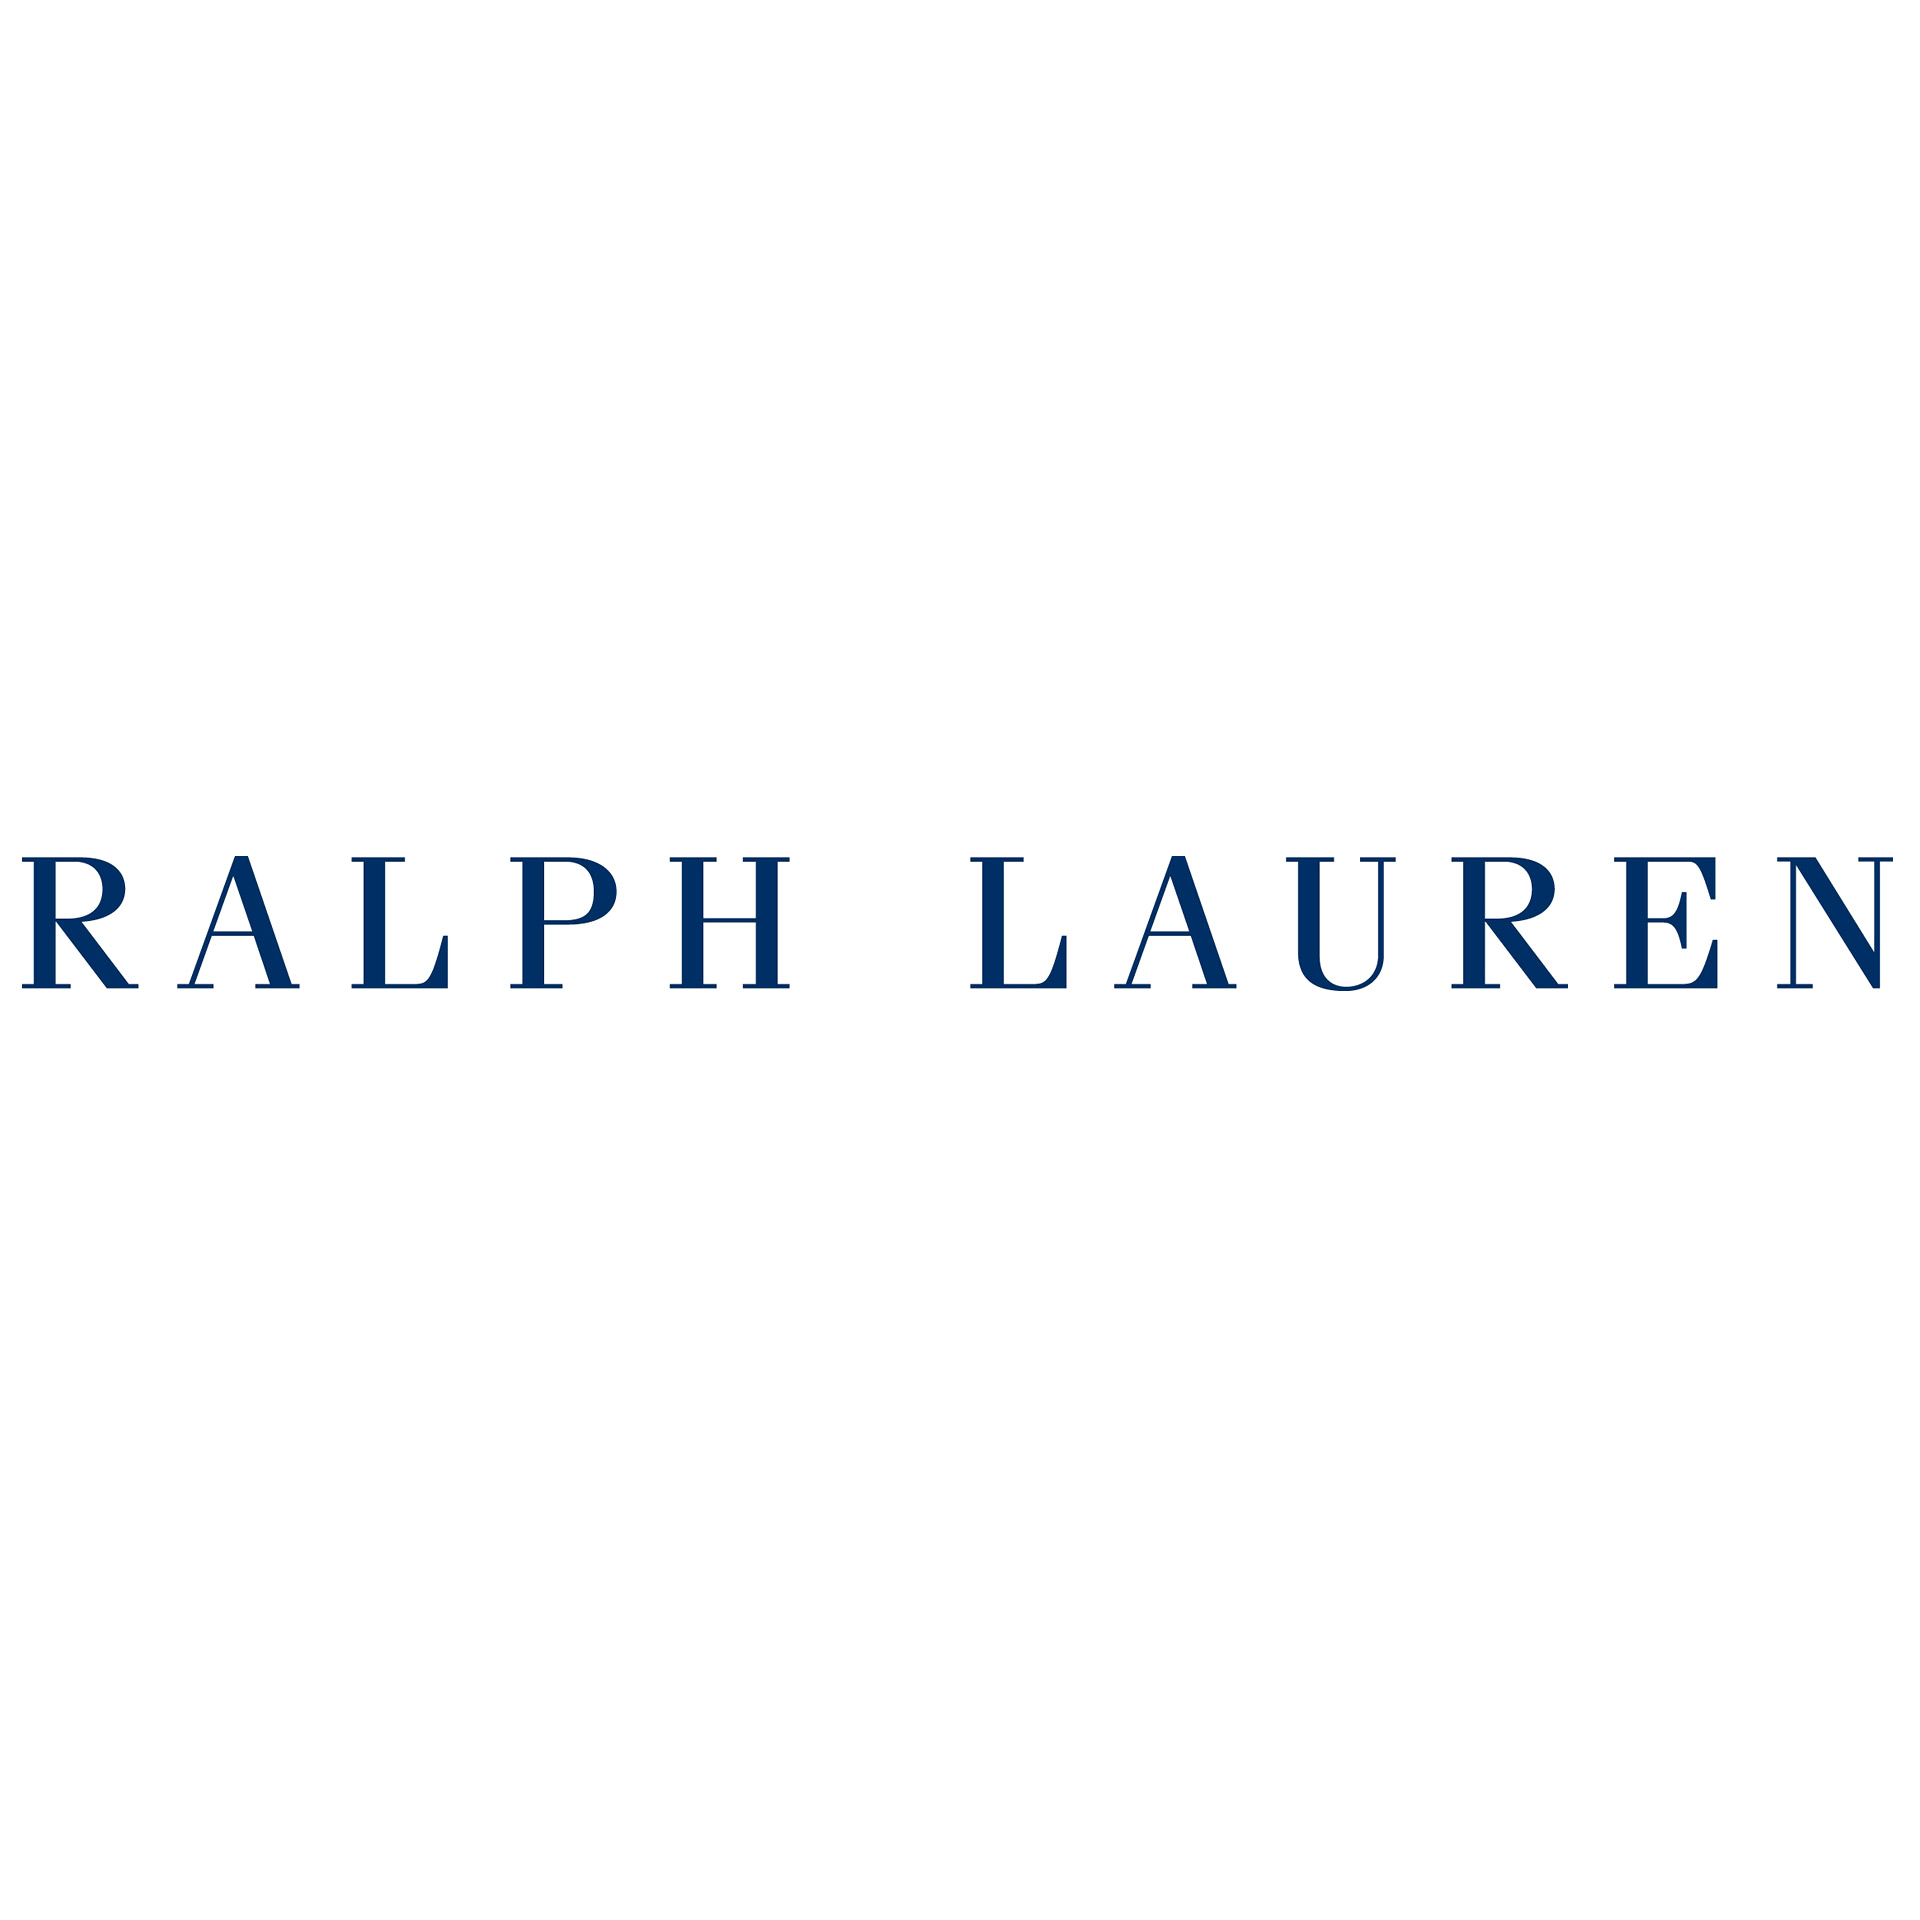 Learn to build your brand at Ralph Lauren employer presentation  SCAD 